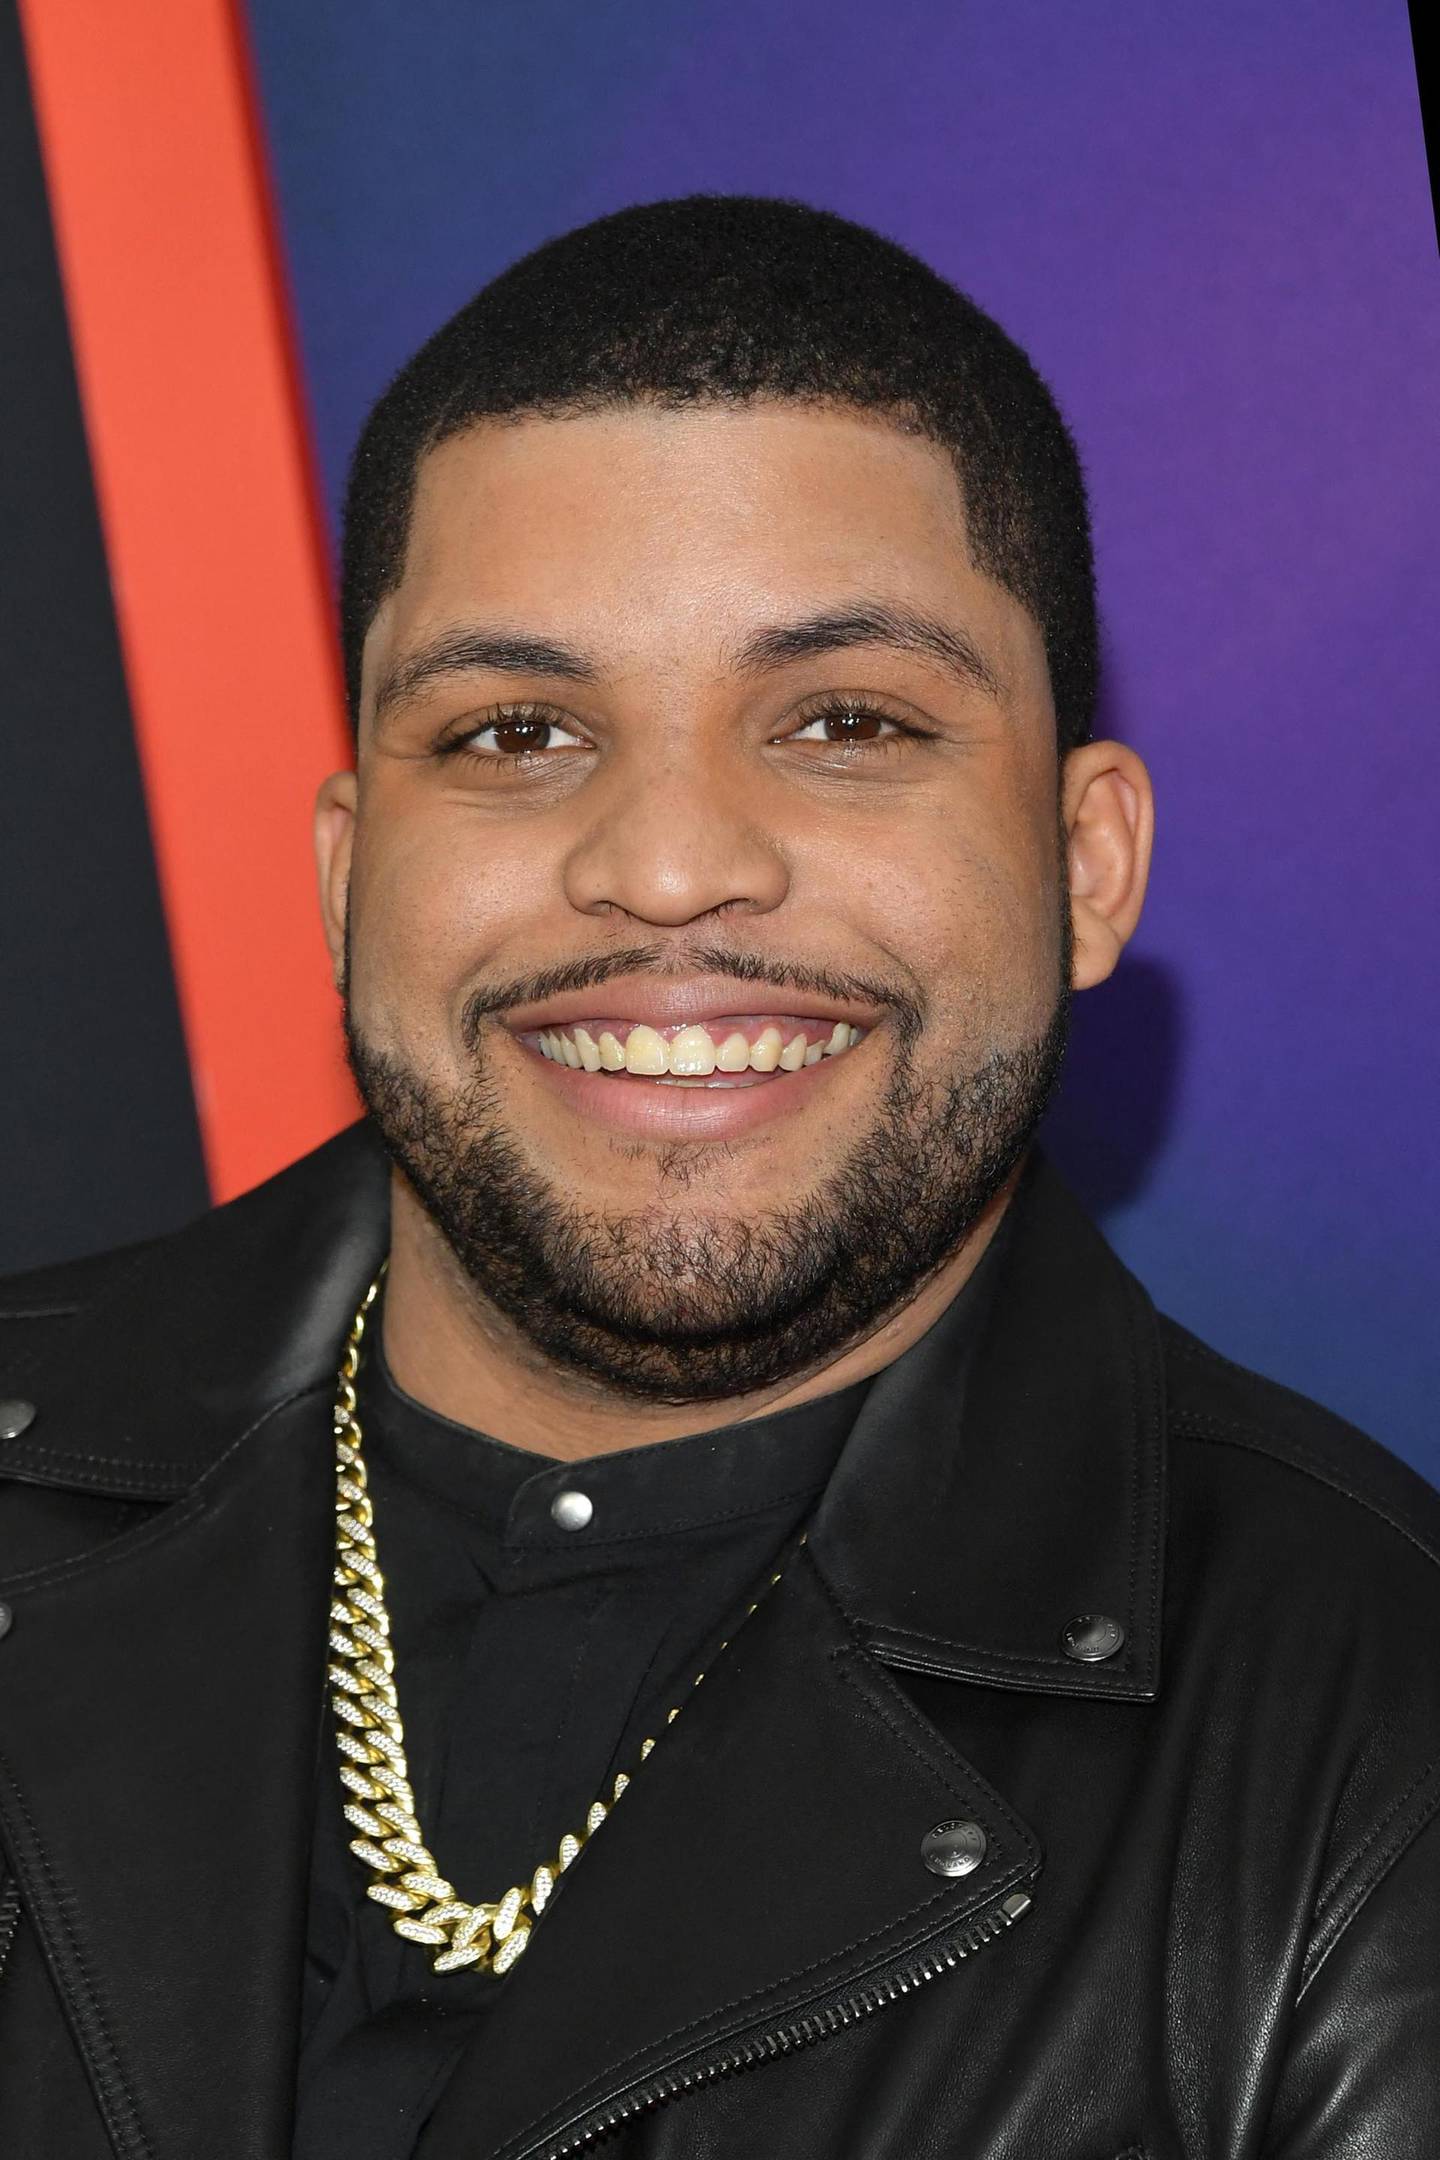 NEW YORK, NEW YORK - APRIL 30: Actor O'Shea Jackson Jr. attends the "Long Shot" New York Premiere at AMC Lincoln Square Theater on April 30, 2019 in New York City.   Mike Coppola/Getty Images/AFP (Photo by Mike Coppola / GETTY IMAGES NORTH AMERICA / AFP)